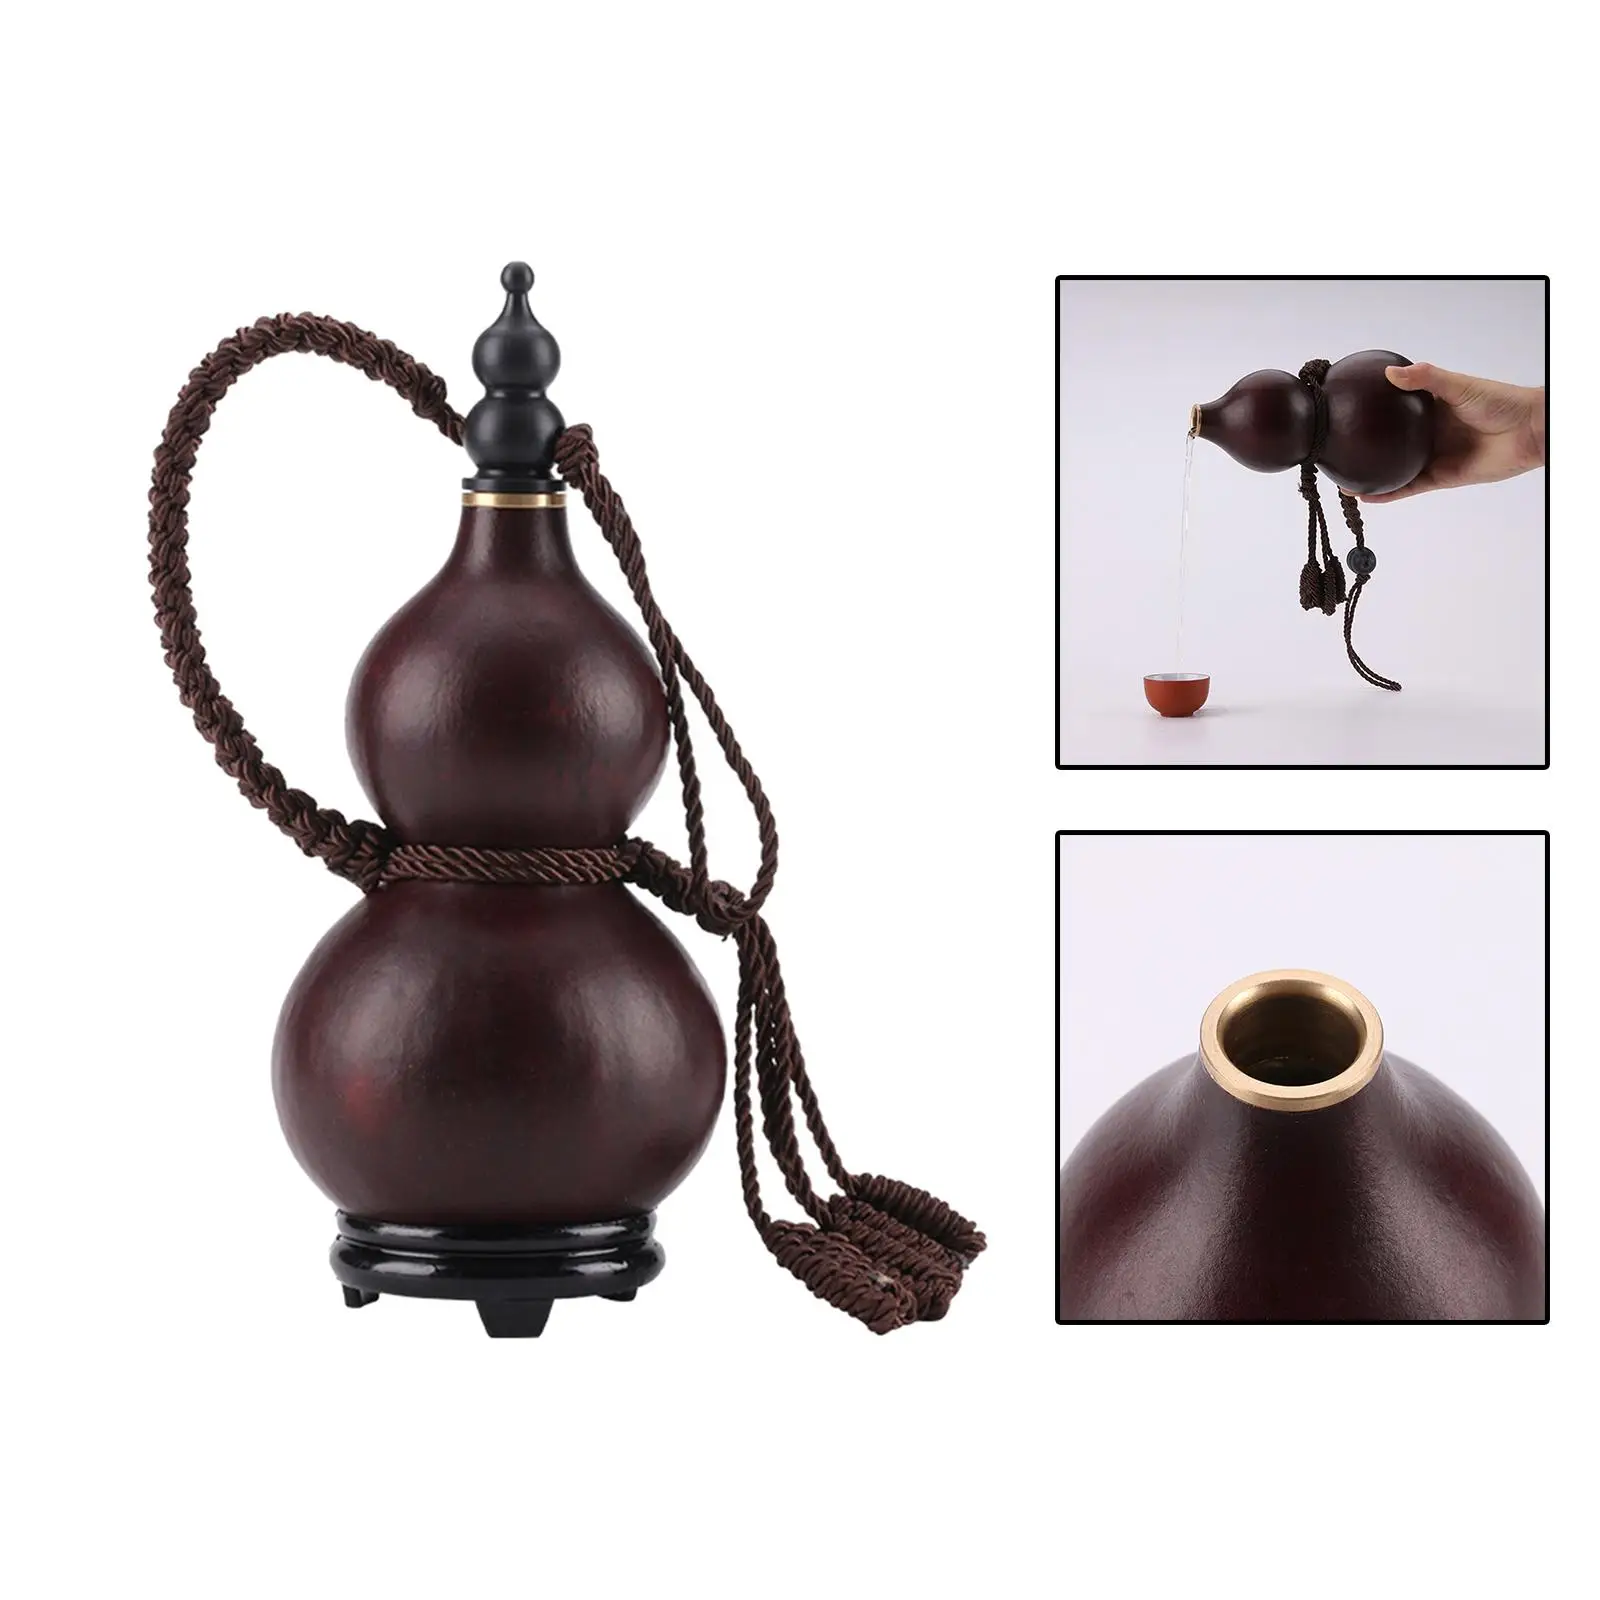 Gourd Water Bottle Beeswax Waterproof Hollow Calabash Wine Gourd Drinking Gourd for Camping Interior Drinks Holder Home Ornament